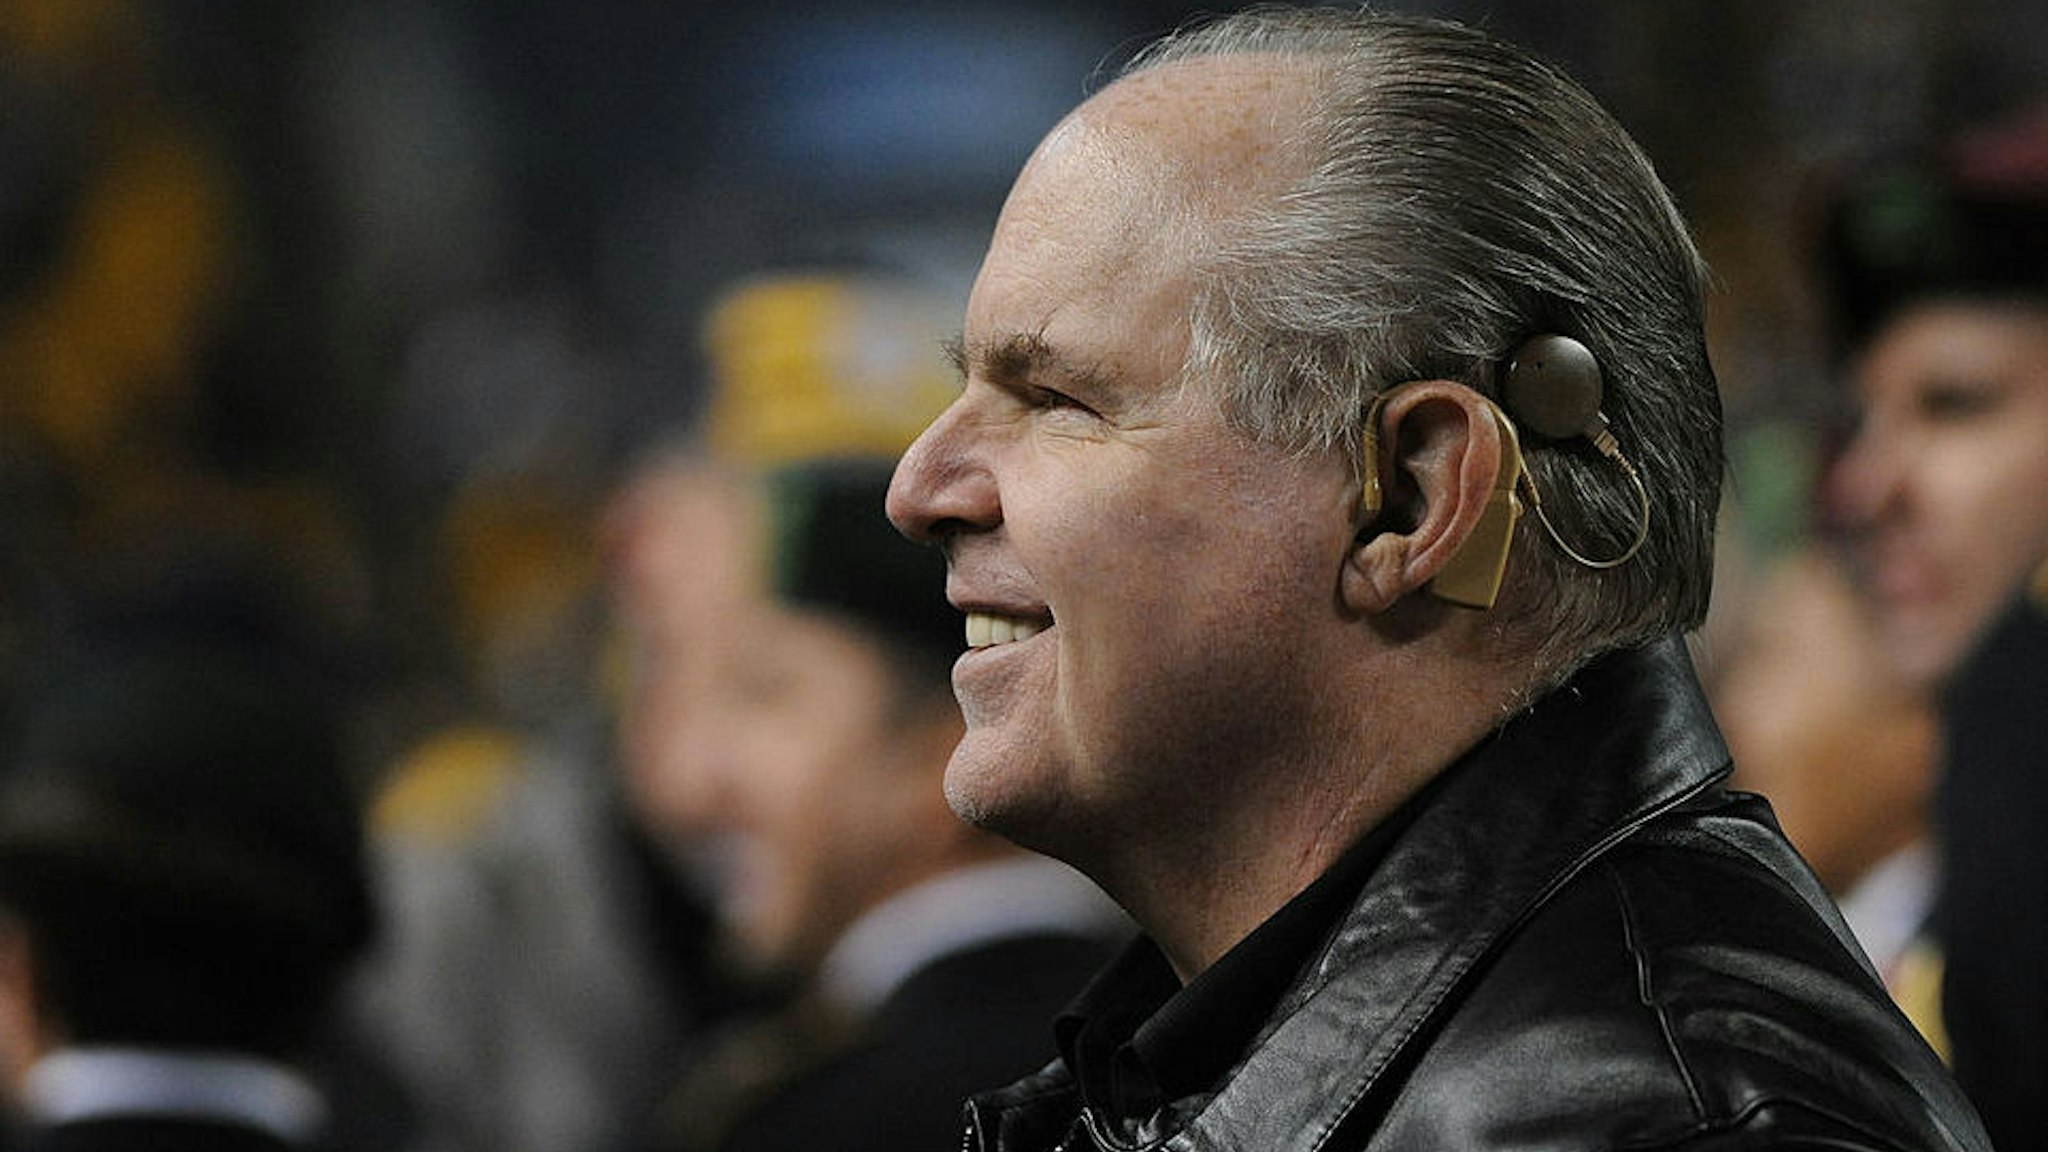 Radio talk show host and political commentator Rush Limbaugh looks on from the sideline before a National Football League game between the Baltimore Ravens and Pittsburgh Steelers at Heinz Field on November 6, 2011 in Pittsburgh, Pennsylvania. The Ravens defeated the Steelers 23-20. (Photo by George Gojkovich/Getty Images)